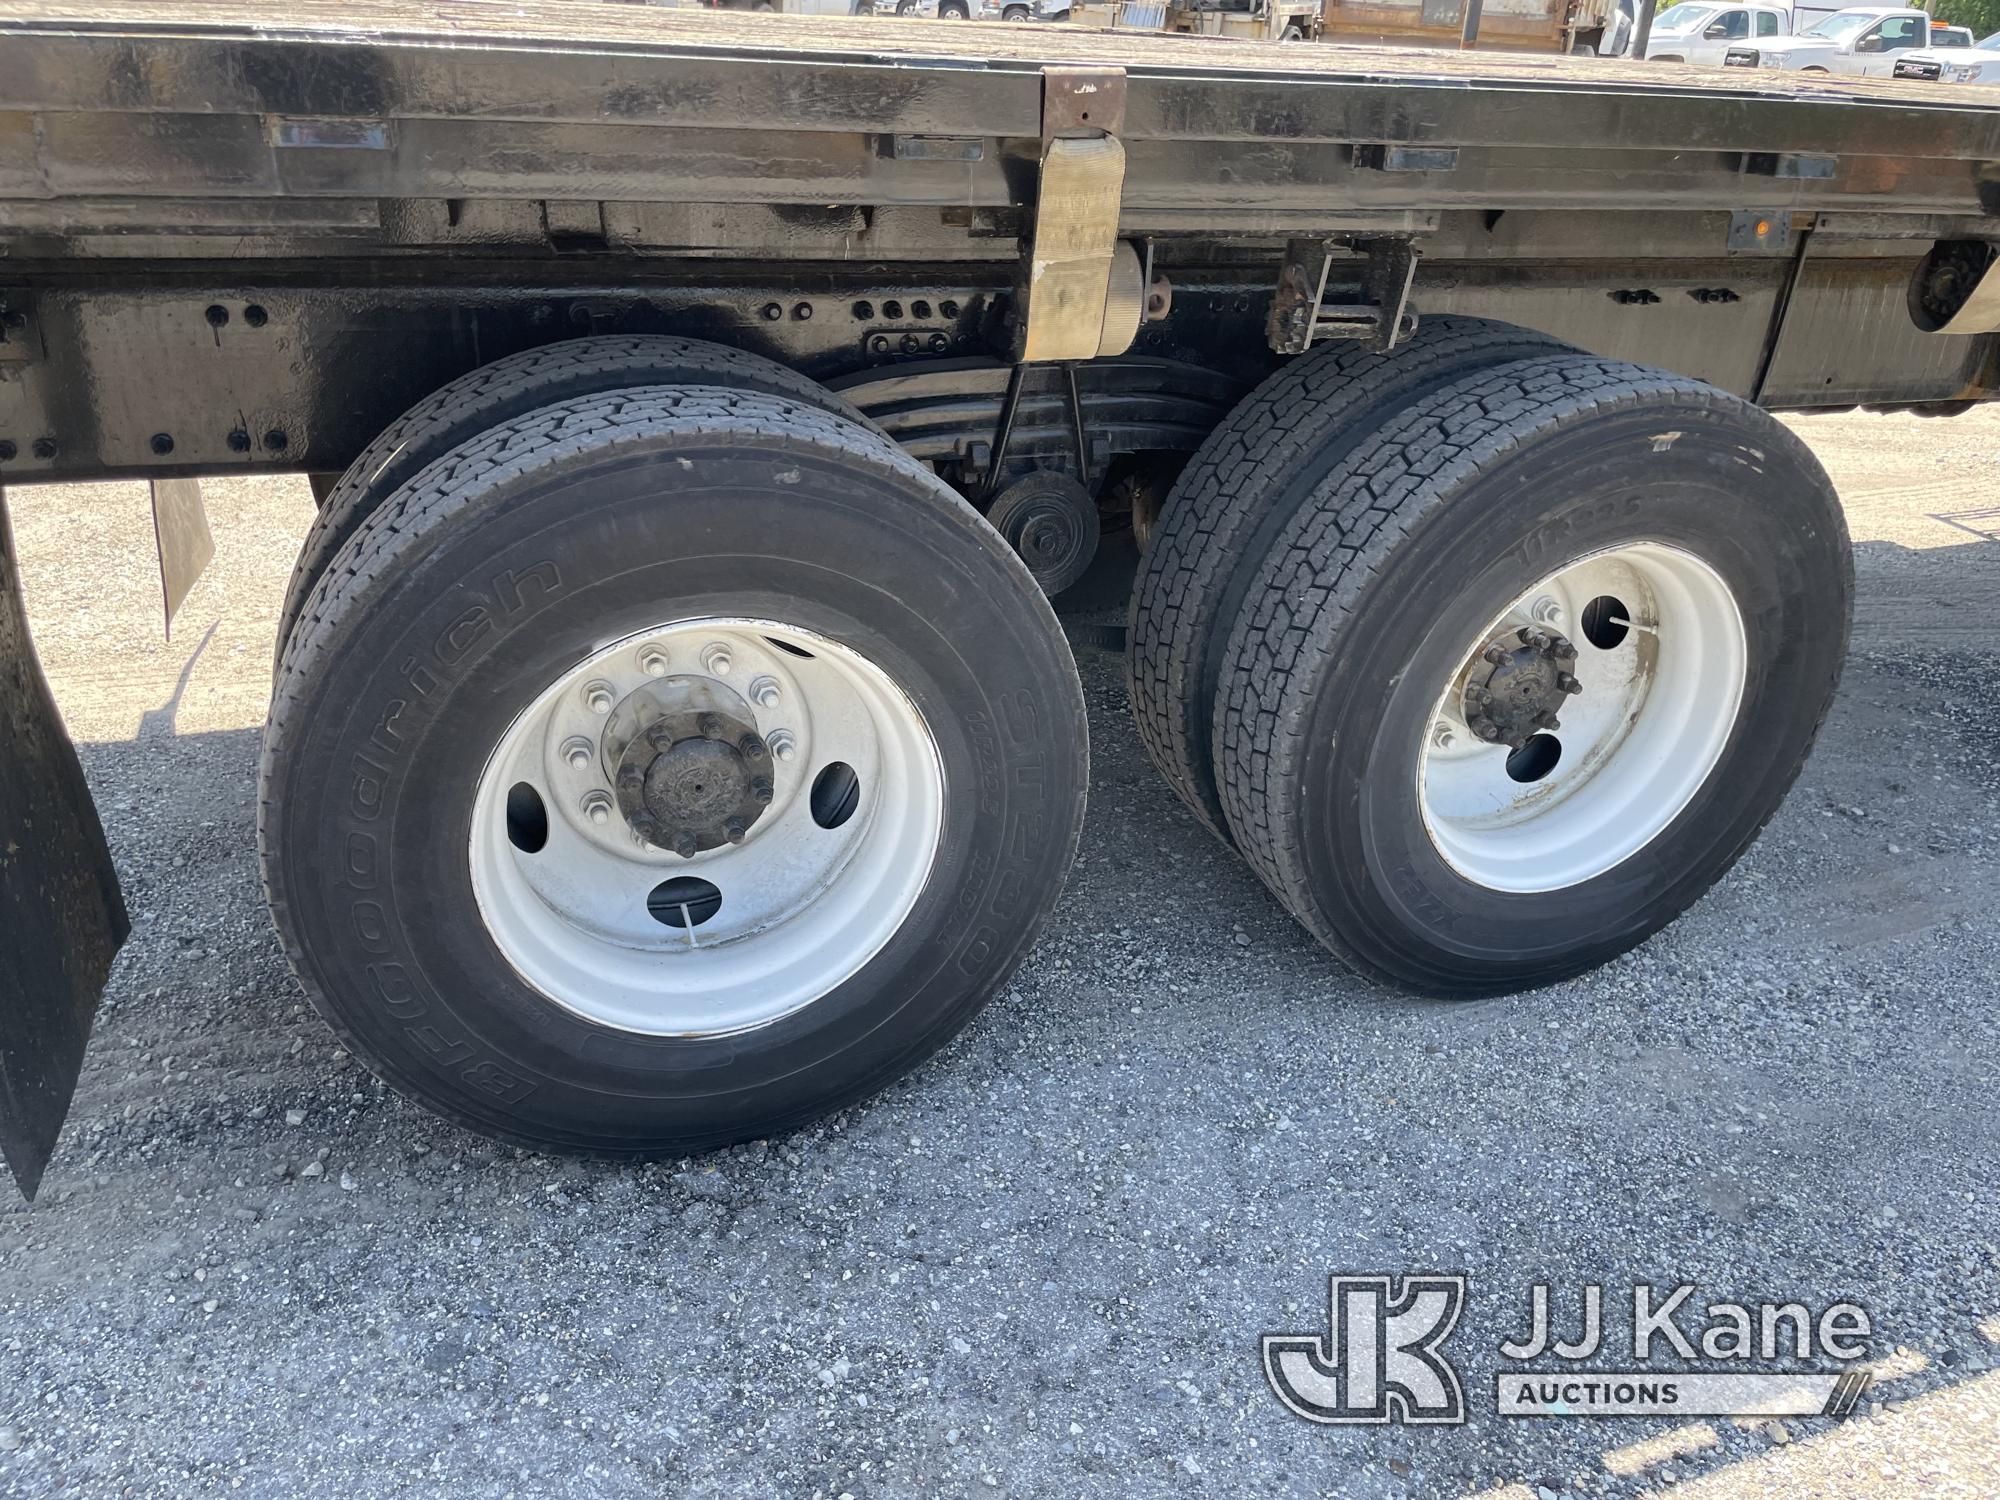 (Plymouth Meeting, PA) 2007 Volvo VHD T/A Flatbed Truck Runs & Moves, Body & Rust Damage